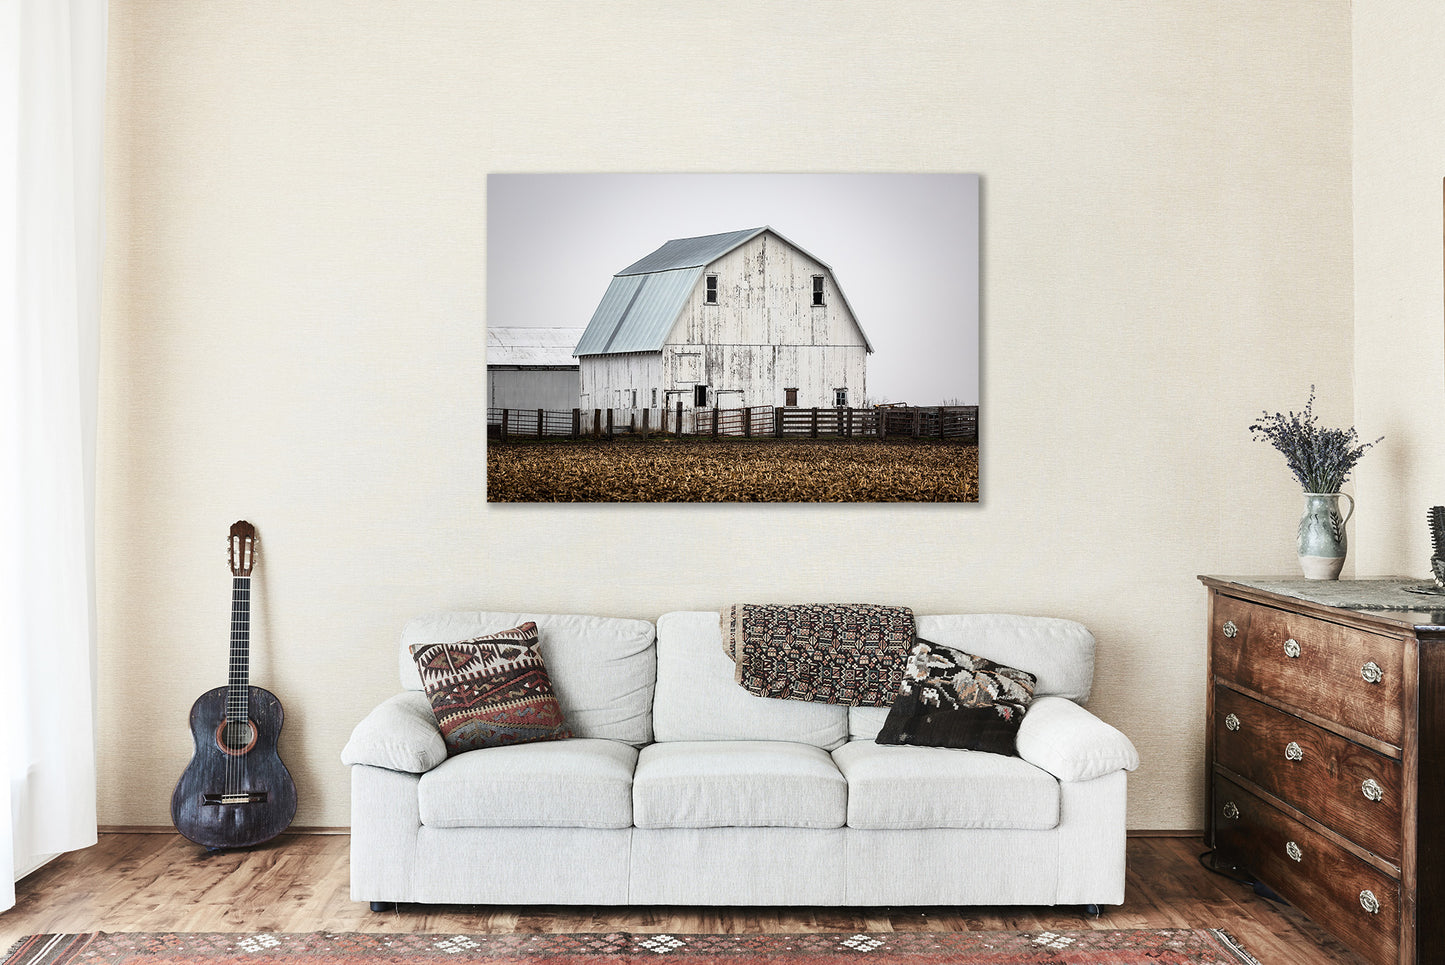 Farmhouse Wall Art - Metal Print on Aluminum of Rustic White Barn on Spring Morning in Illinois - Country Photography Artwork Photo Decor